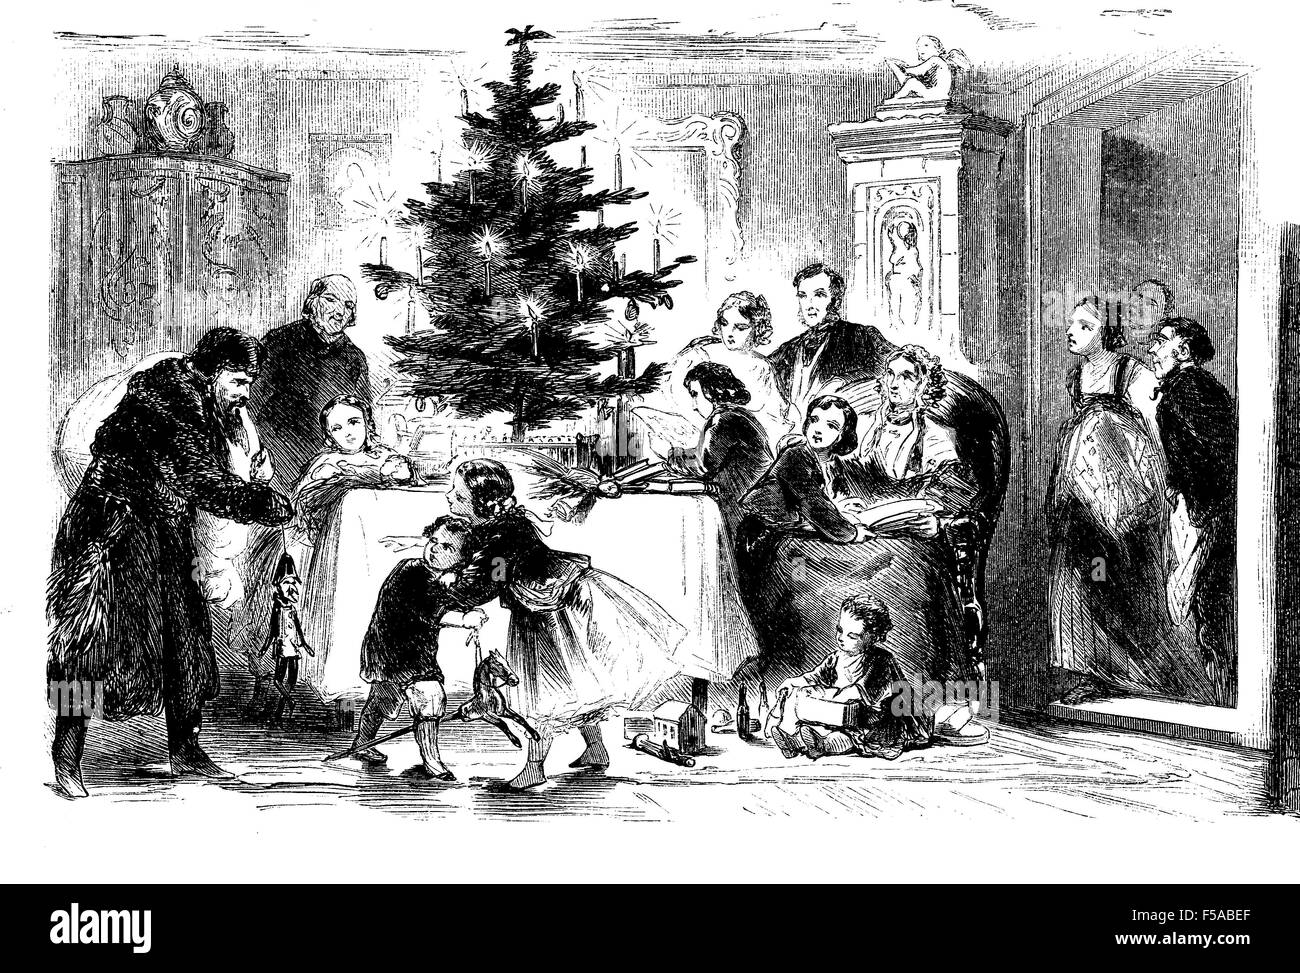 Upper class home: Santa Claus is coming with Christmas presents and toys for the children, vintage illustration Stock Photo